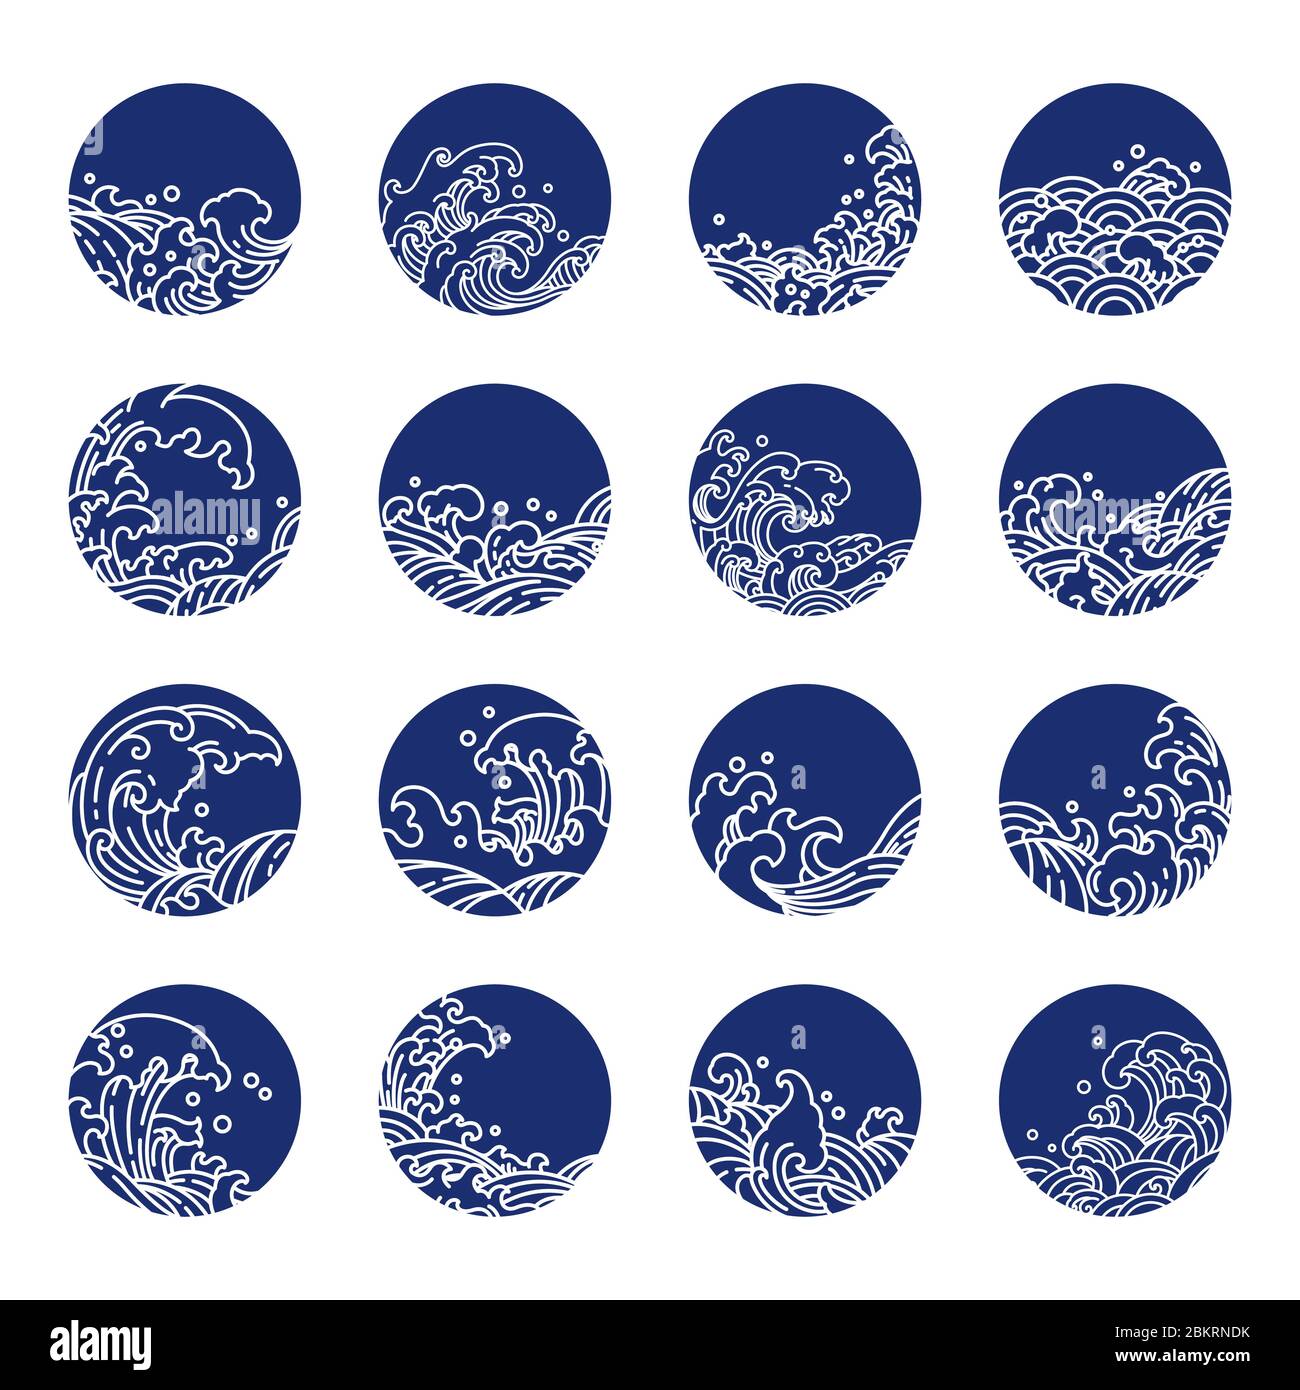 Japan wave line art vector collection set. Indigo and blue print style. Stock Vector